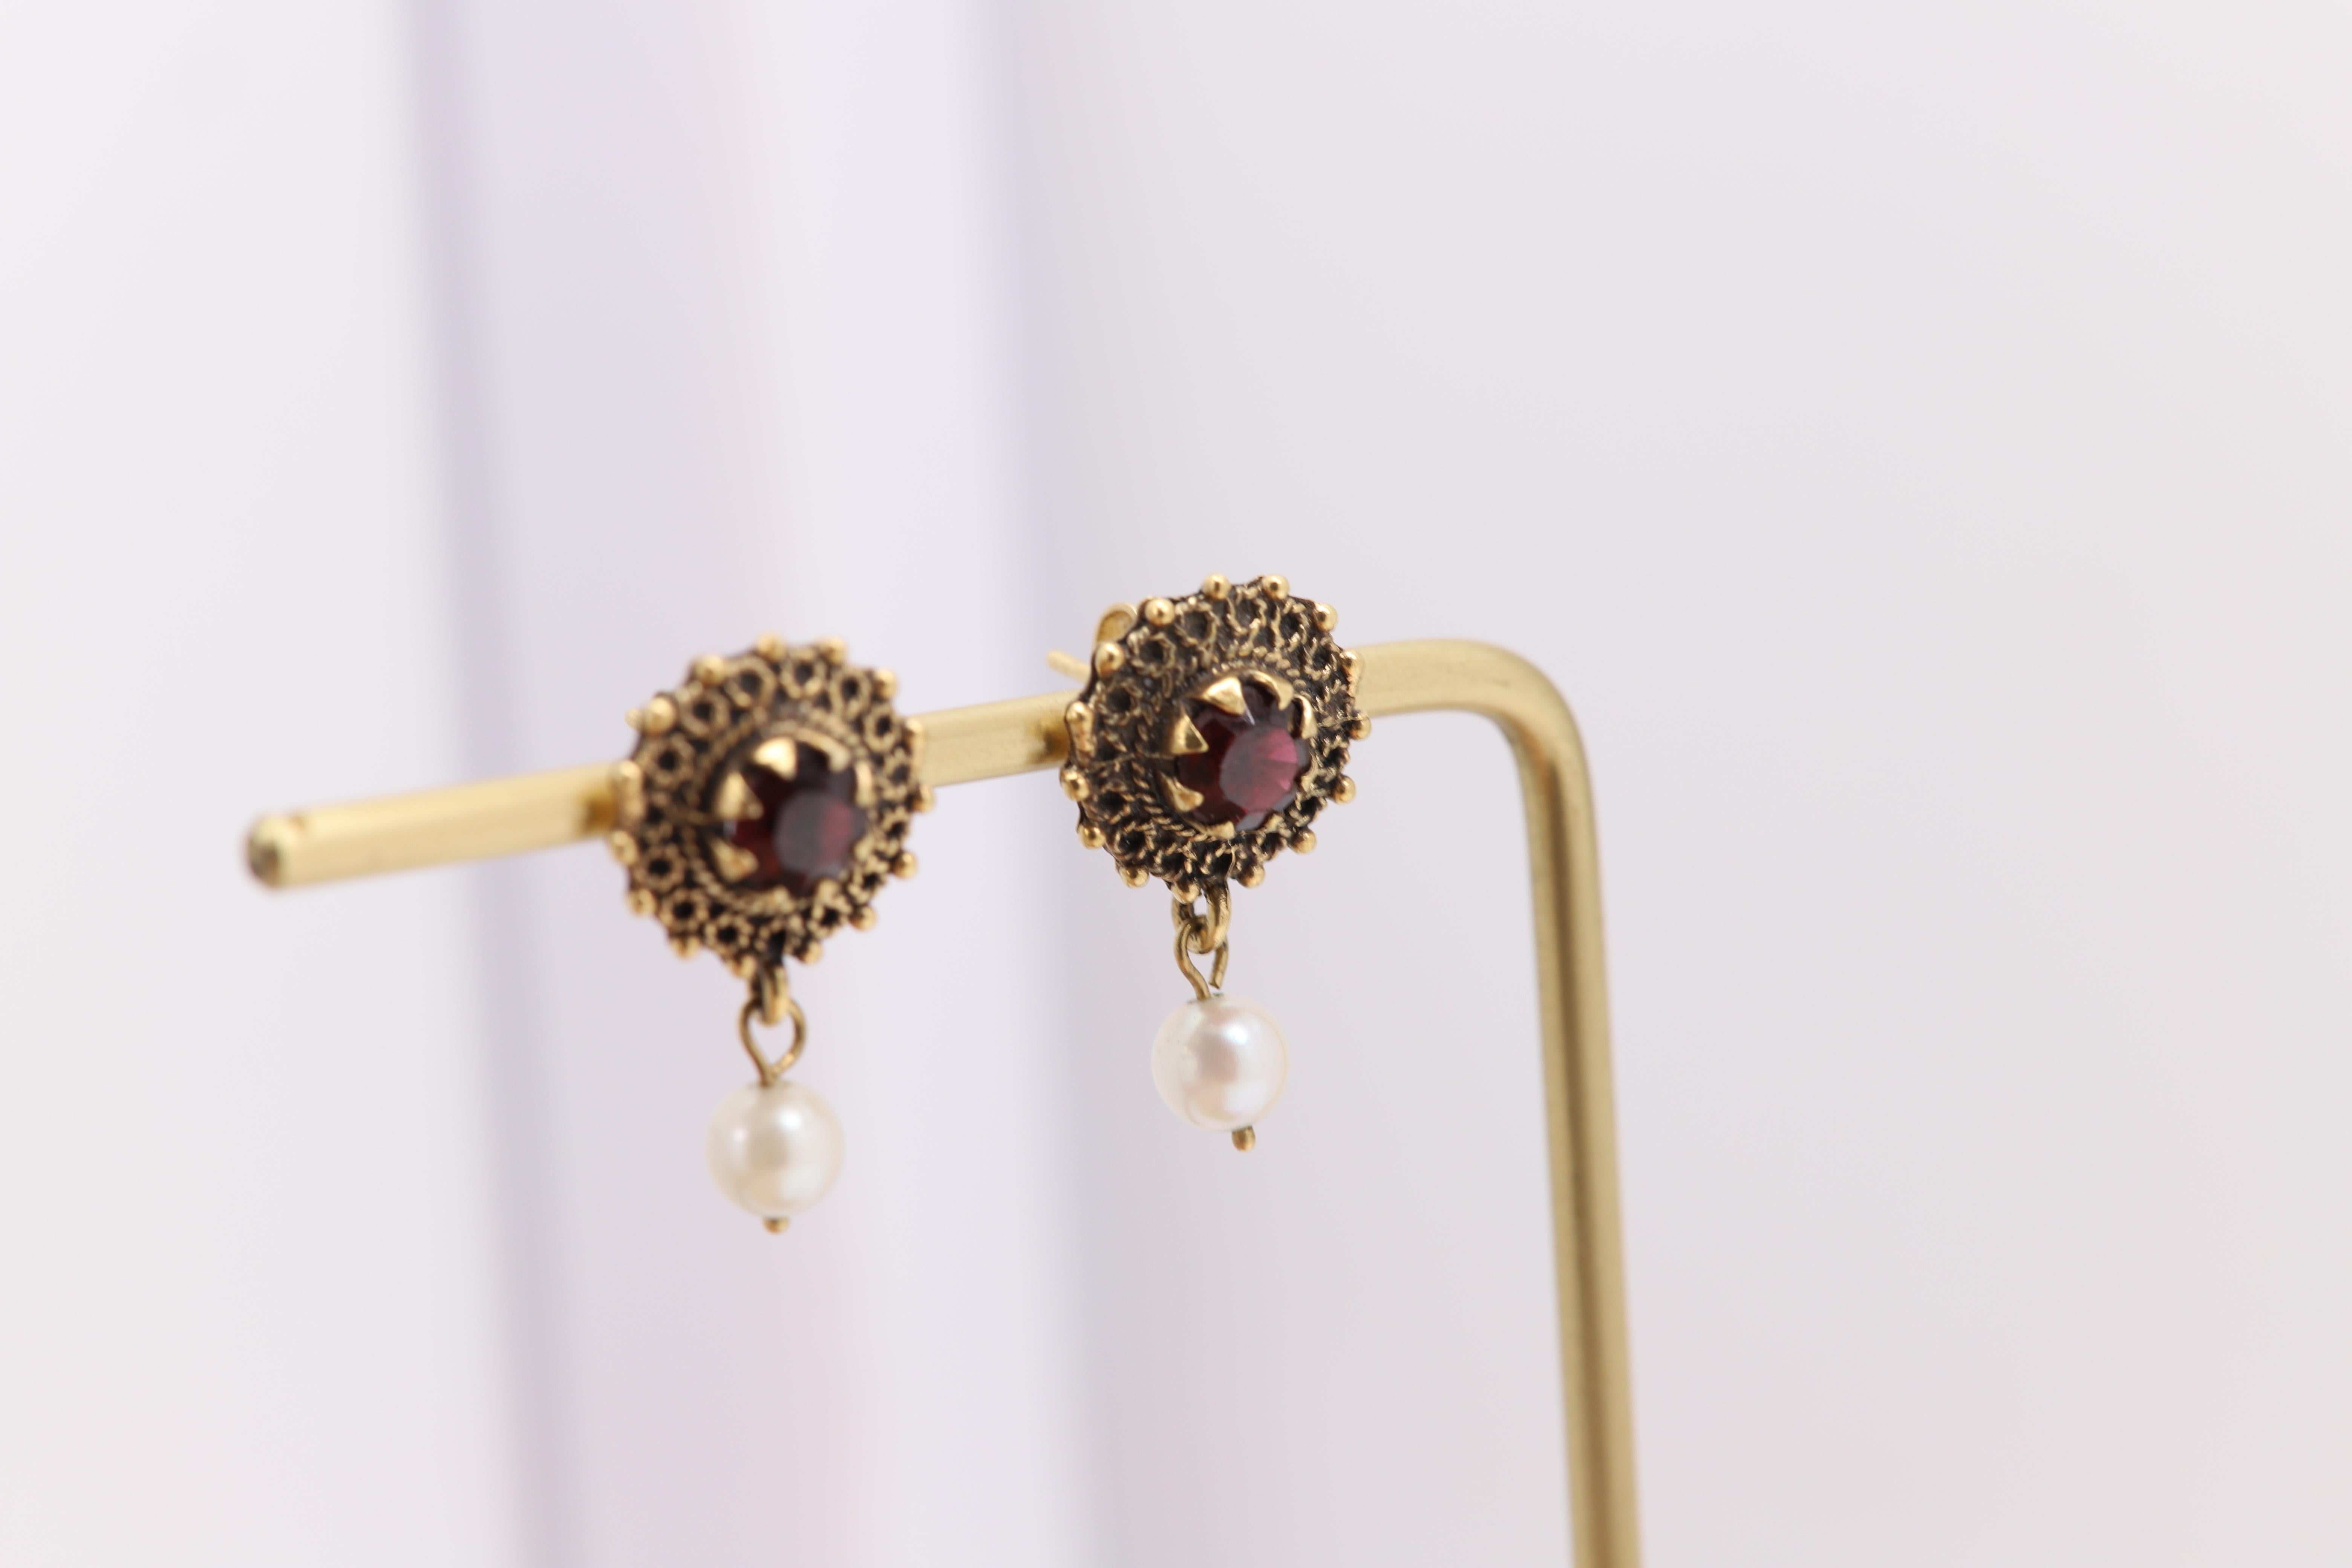 Circa 1940 Garnet Earrings 14 Karat Yellow Gold Pearl and Red Garnet Gemstone In Good Condition For Sale In Brooklyn, NY